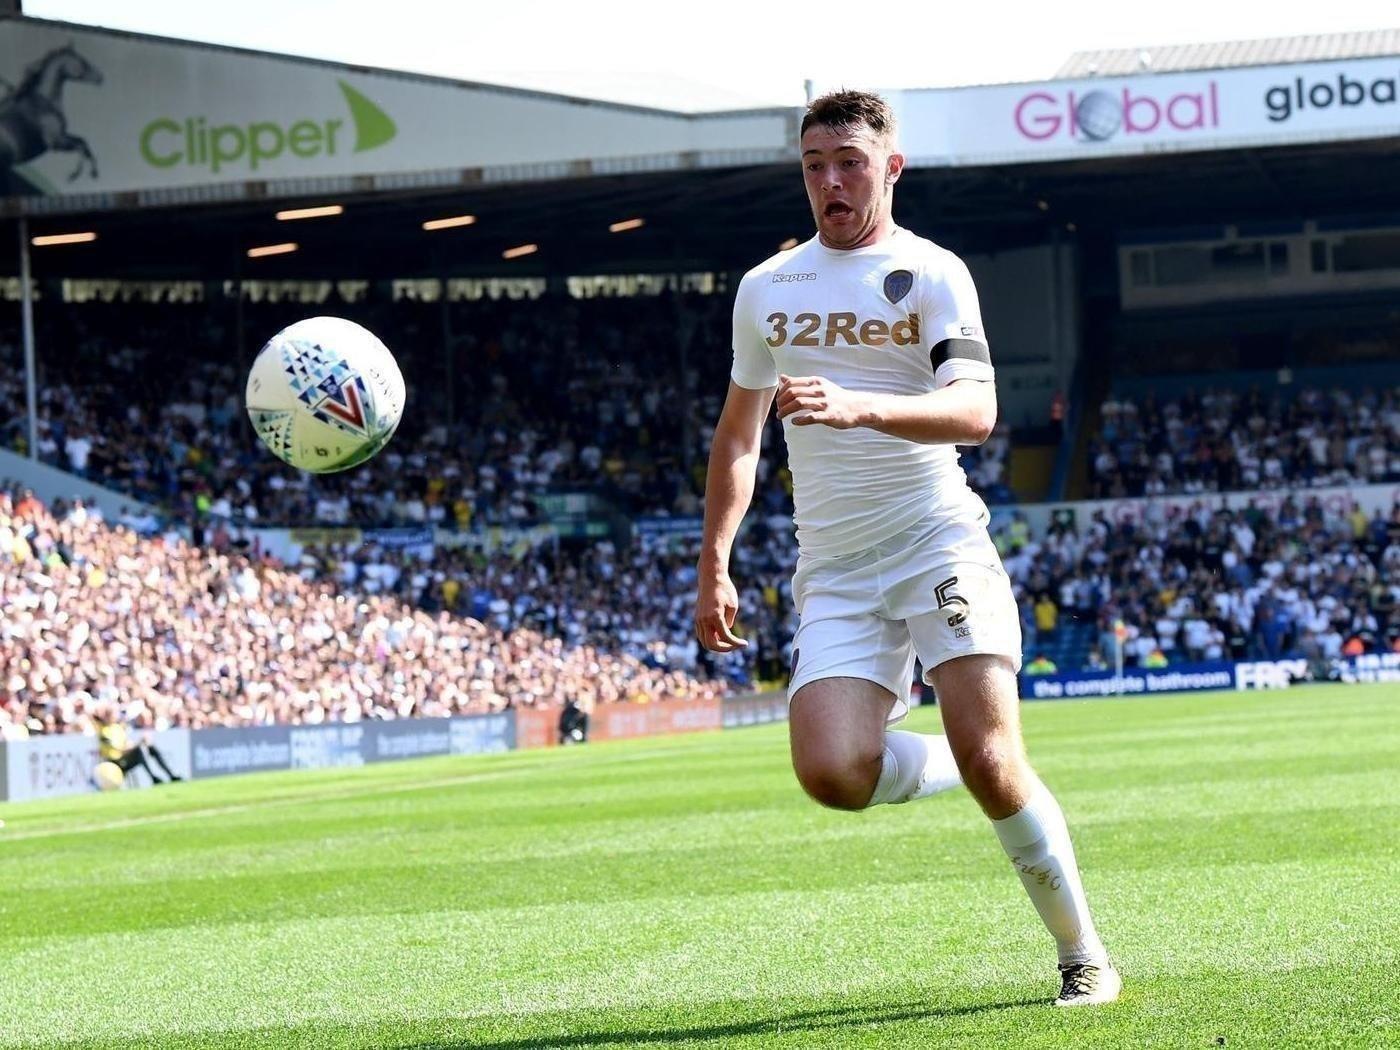 The Leeds defeat could go in Edmondsons favour. Well, at least that is what Noel Whelan is suggesting. The former Whites striker has urged Marcelo Bielsa to give the youngster a chance while the search for a striker continues.